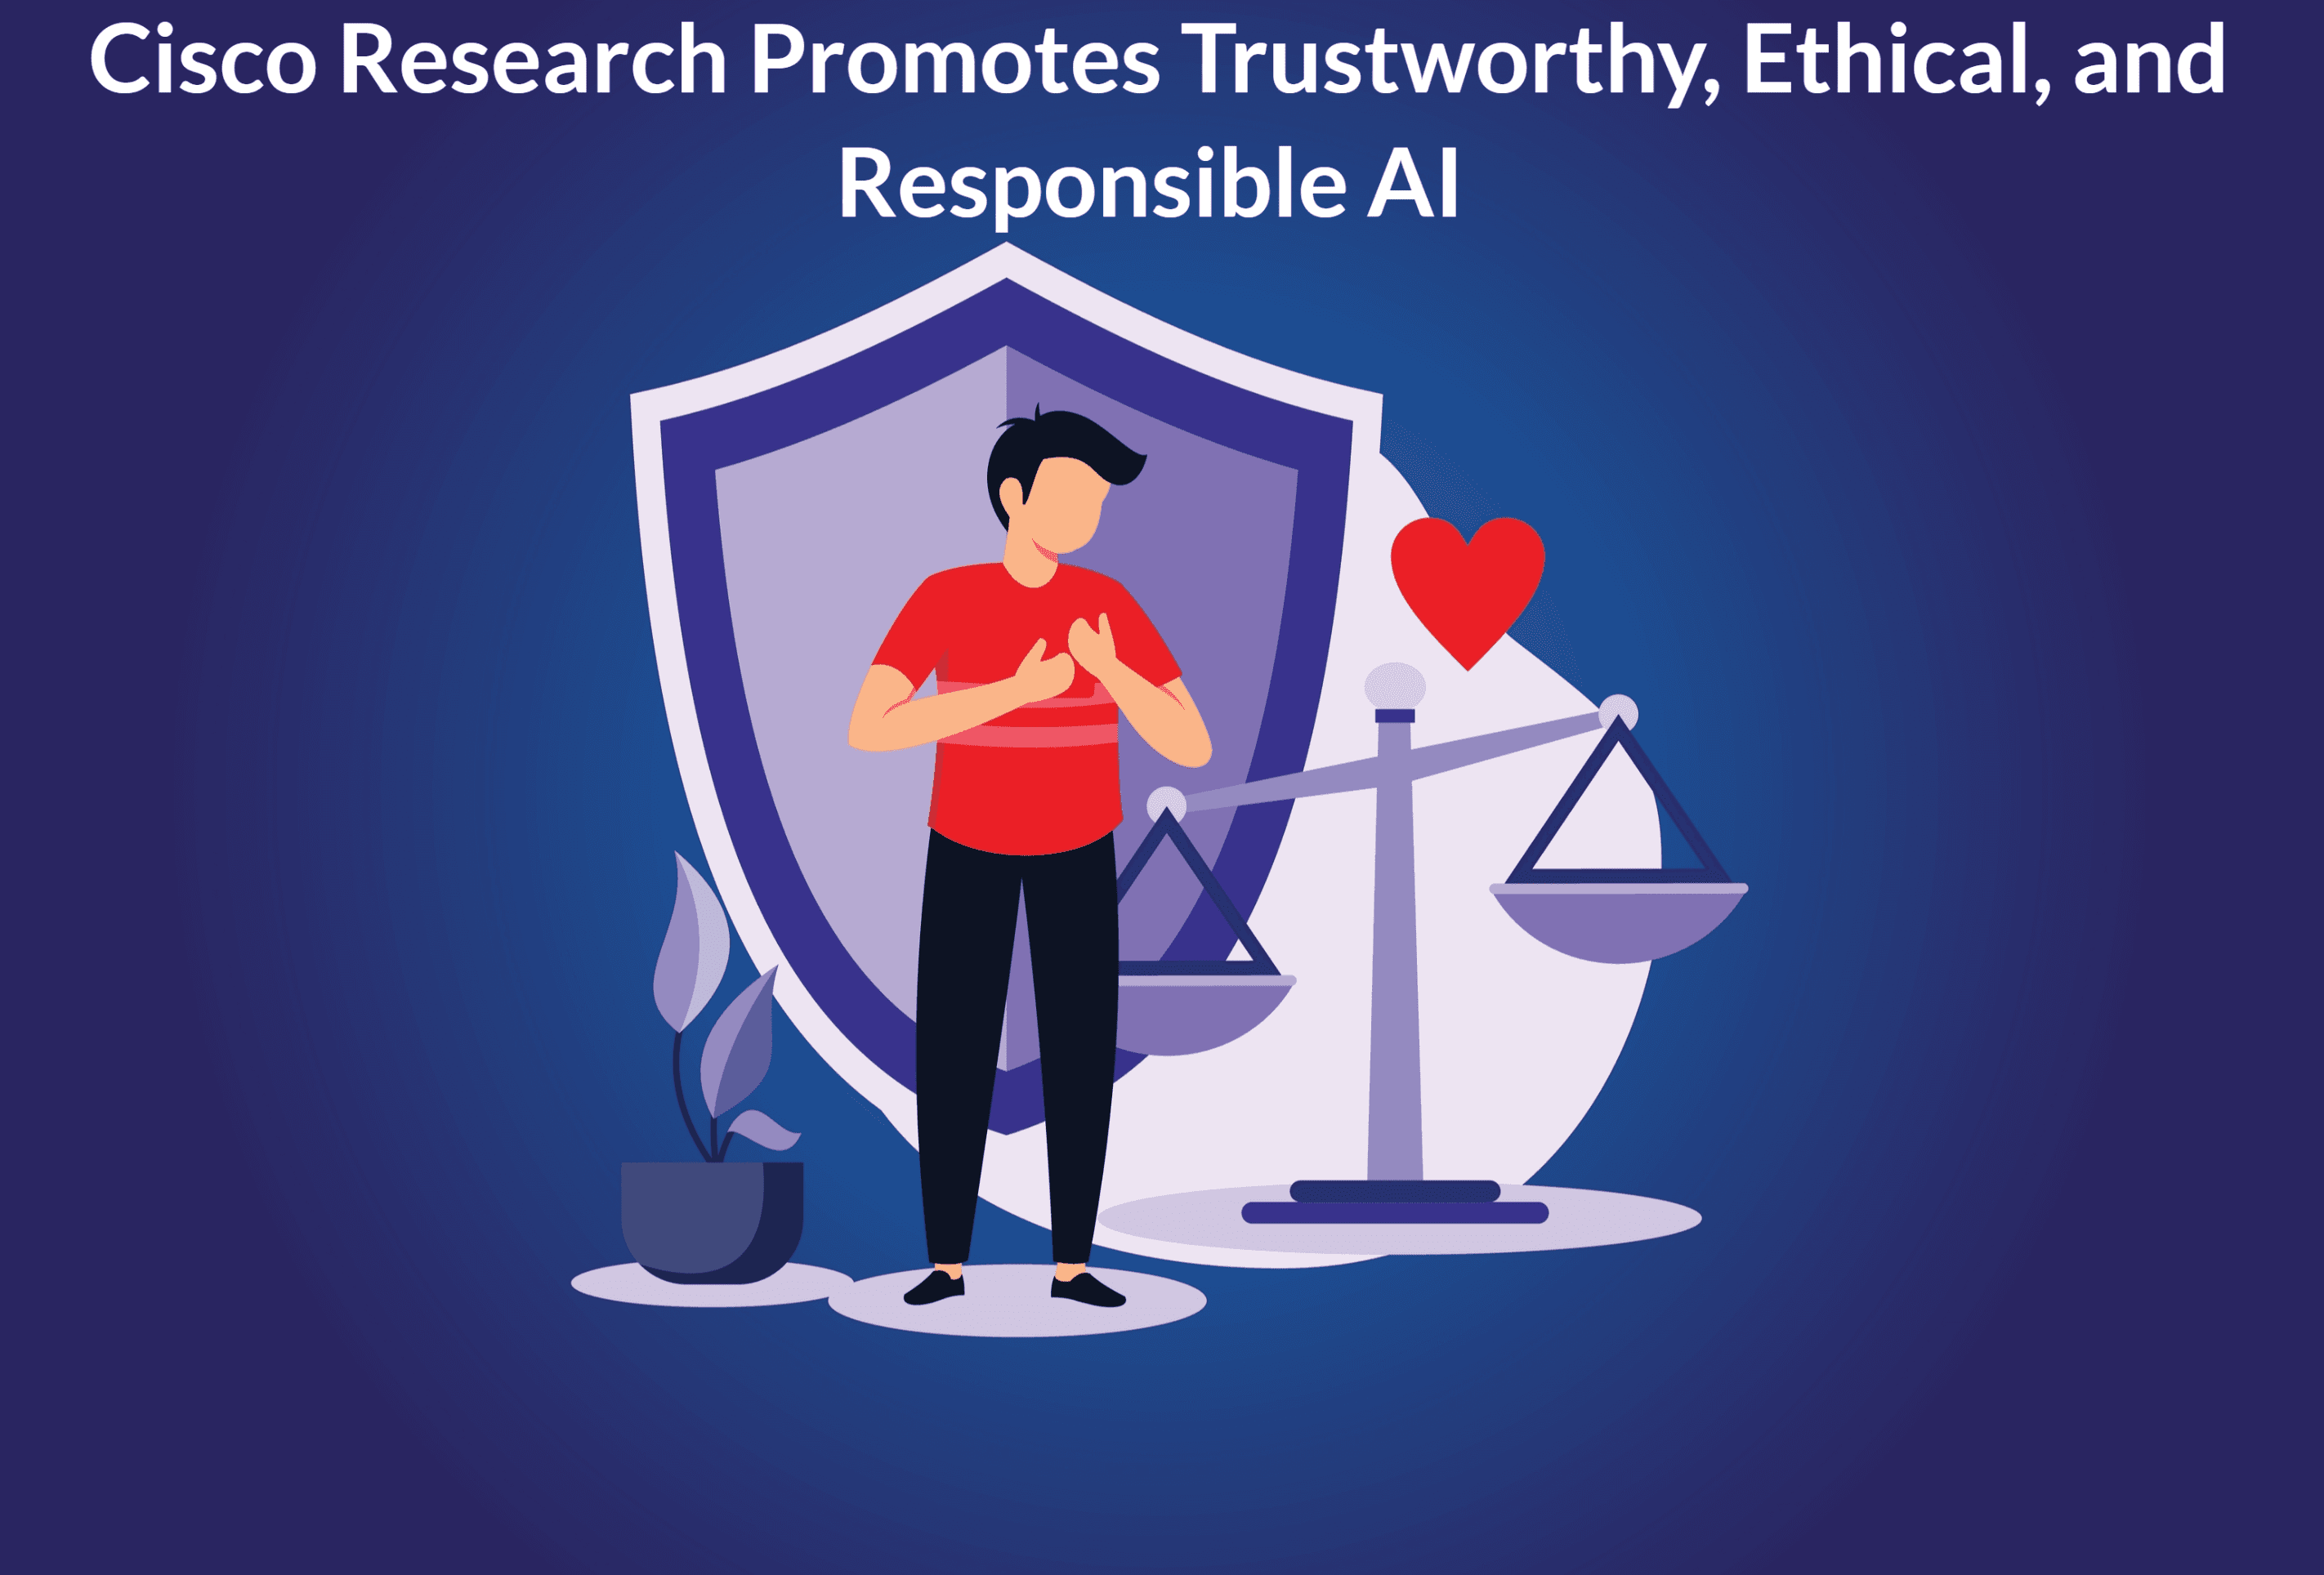 Cisco Research Promotes Trustworthy, Ethical, and Responsible AI